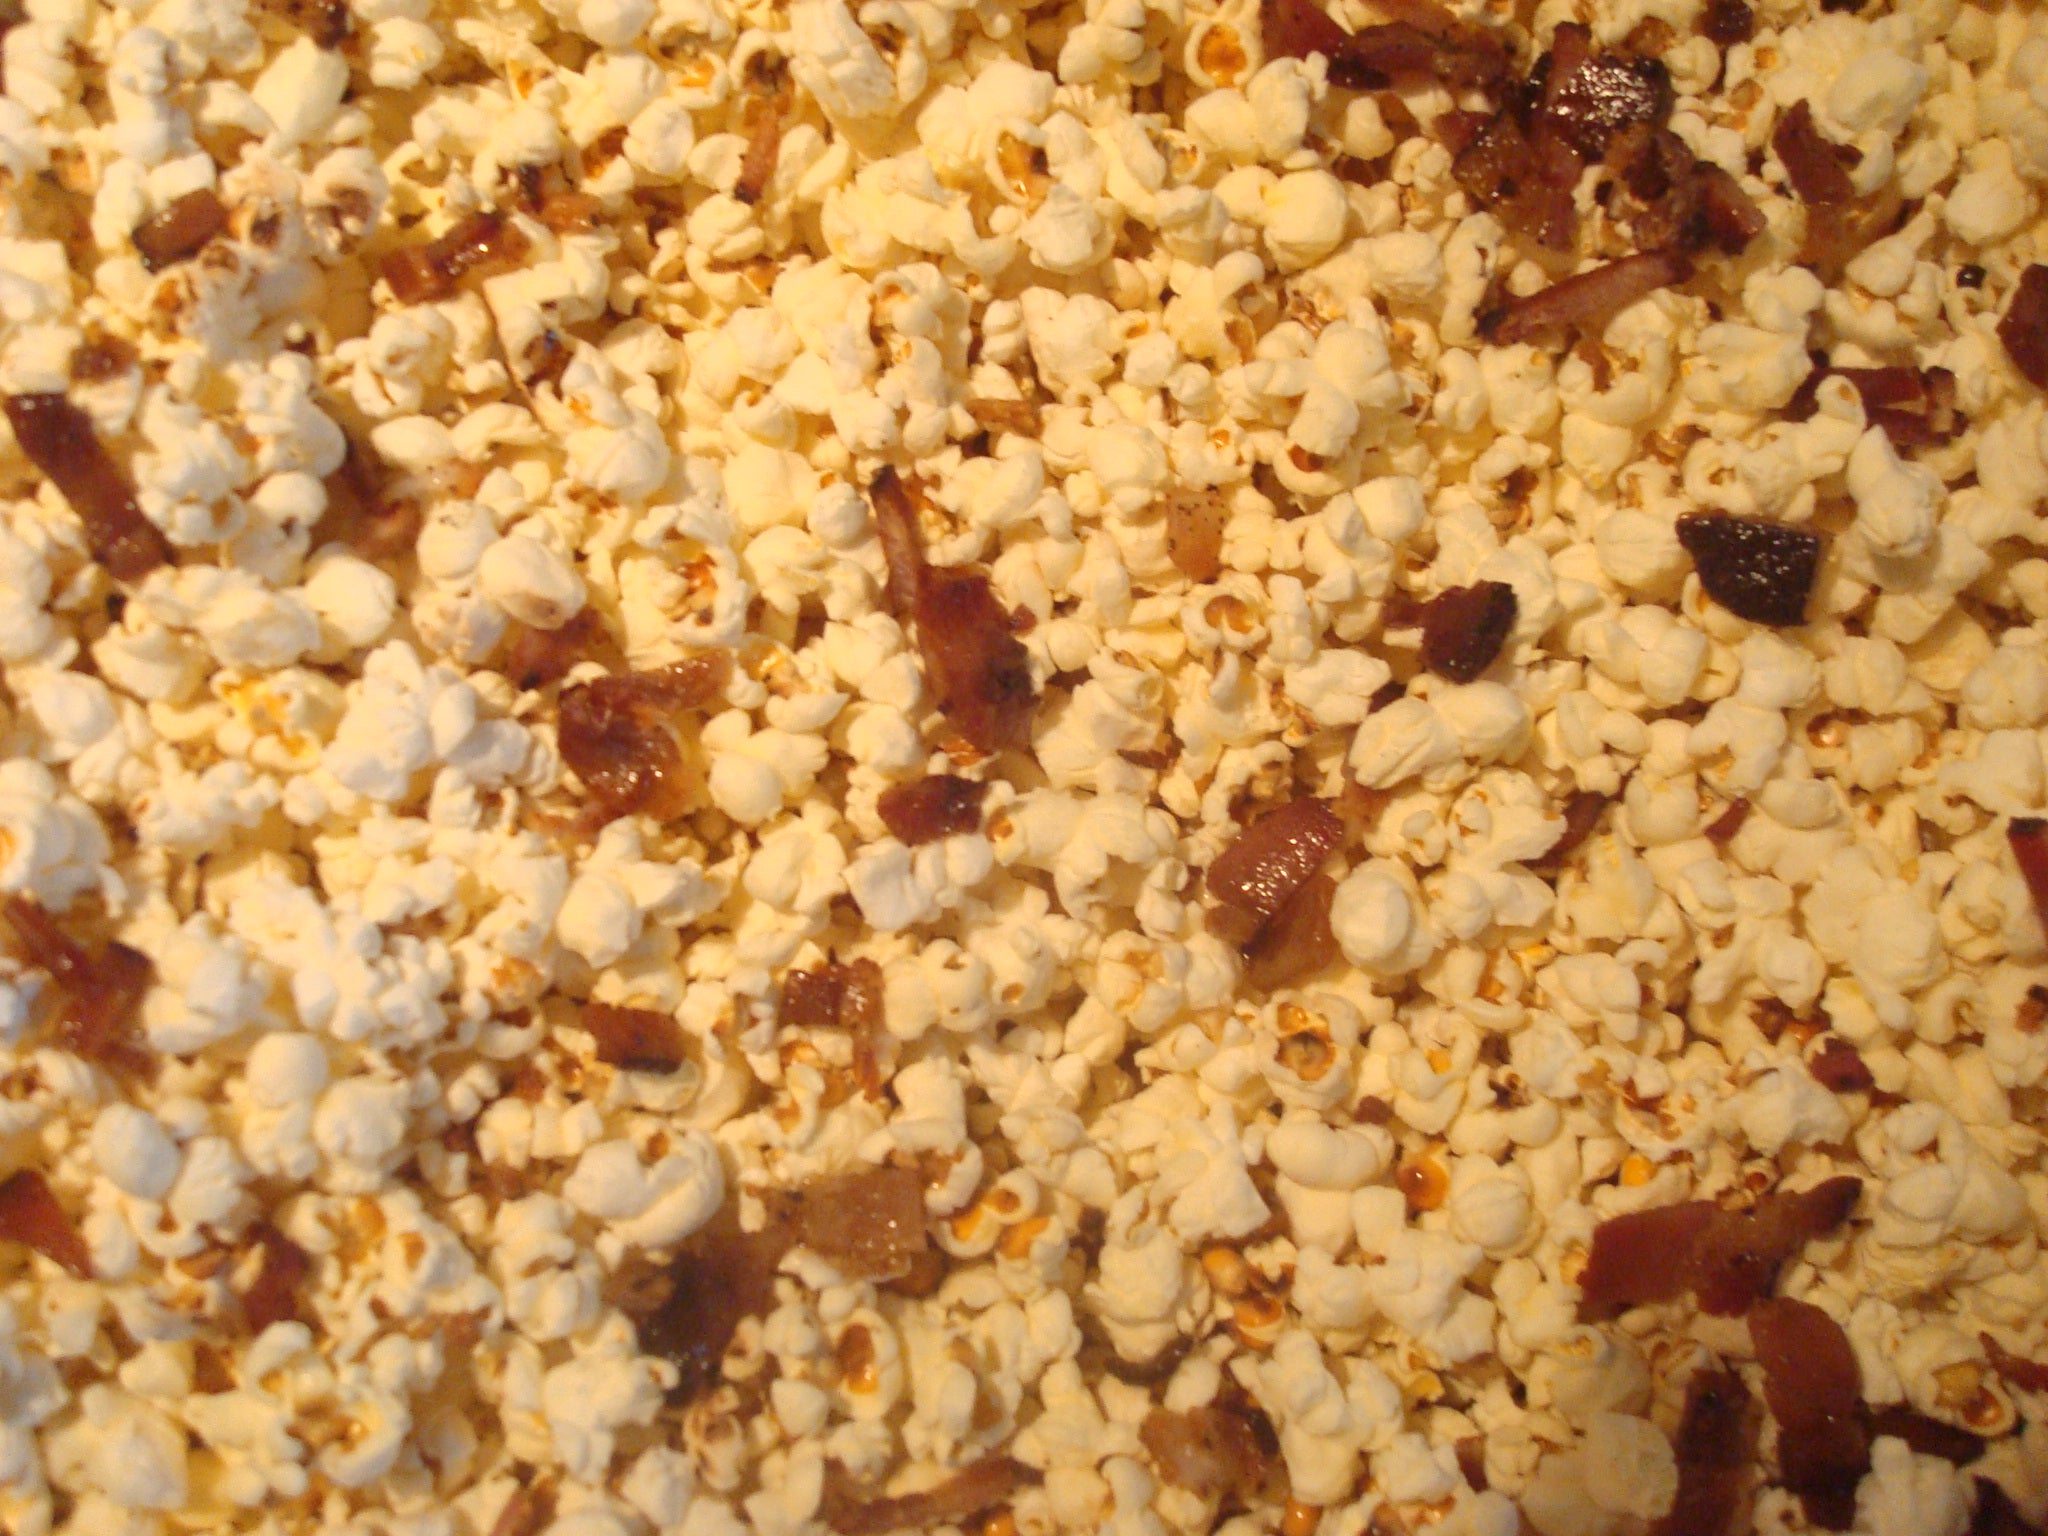 Happier Than A Pig In Mud: Popcorn with Morton Nature's Seasons